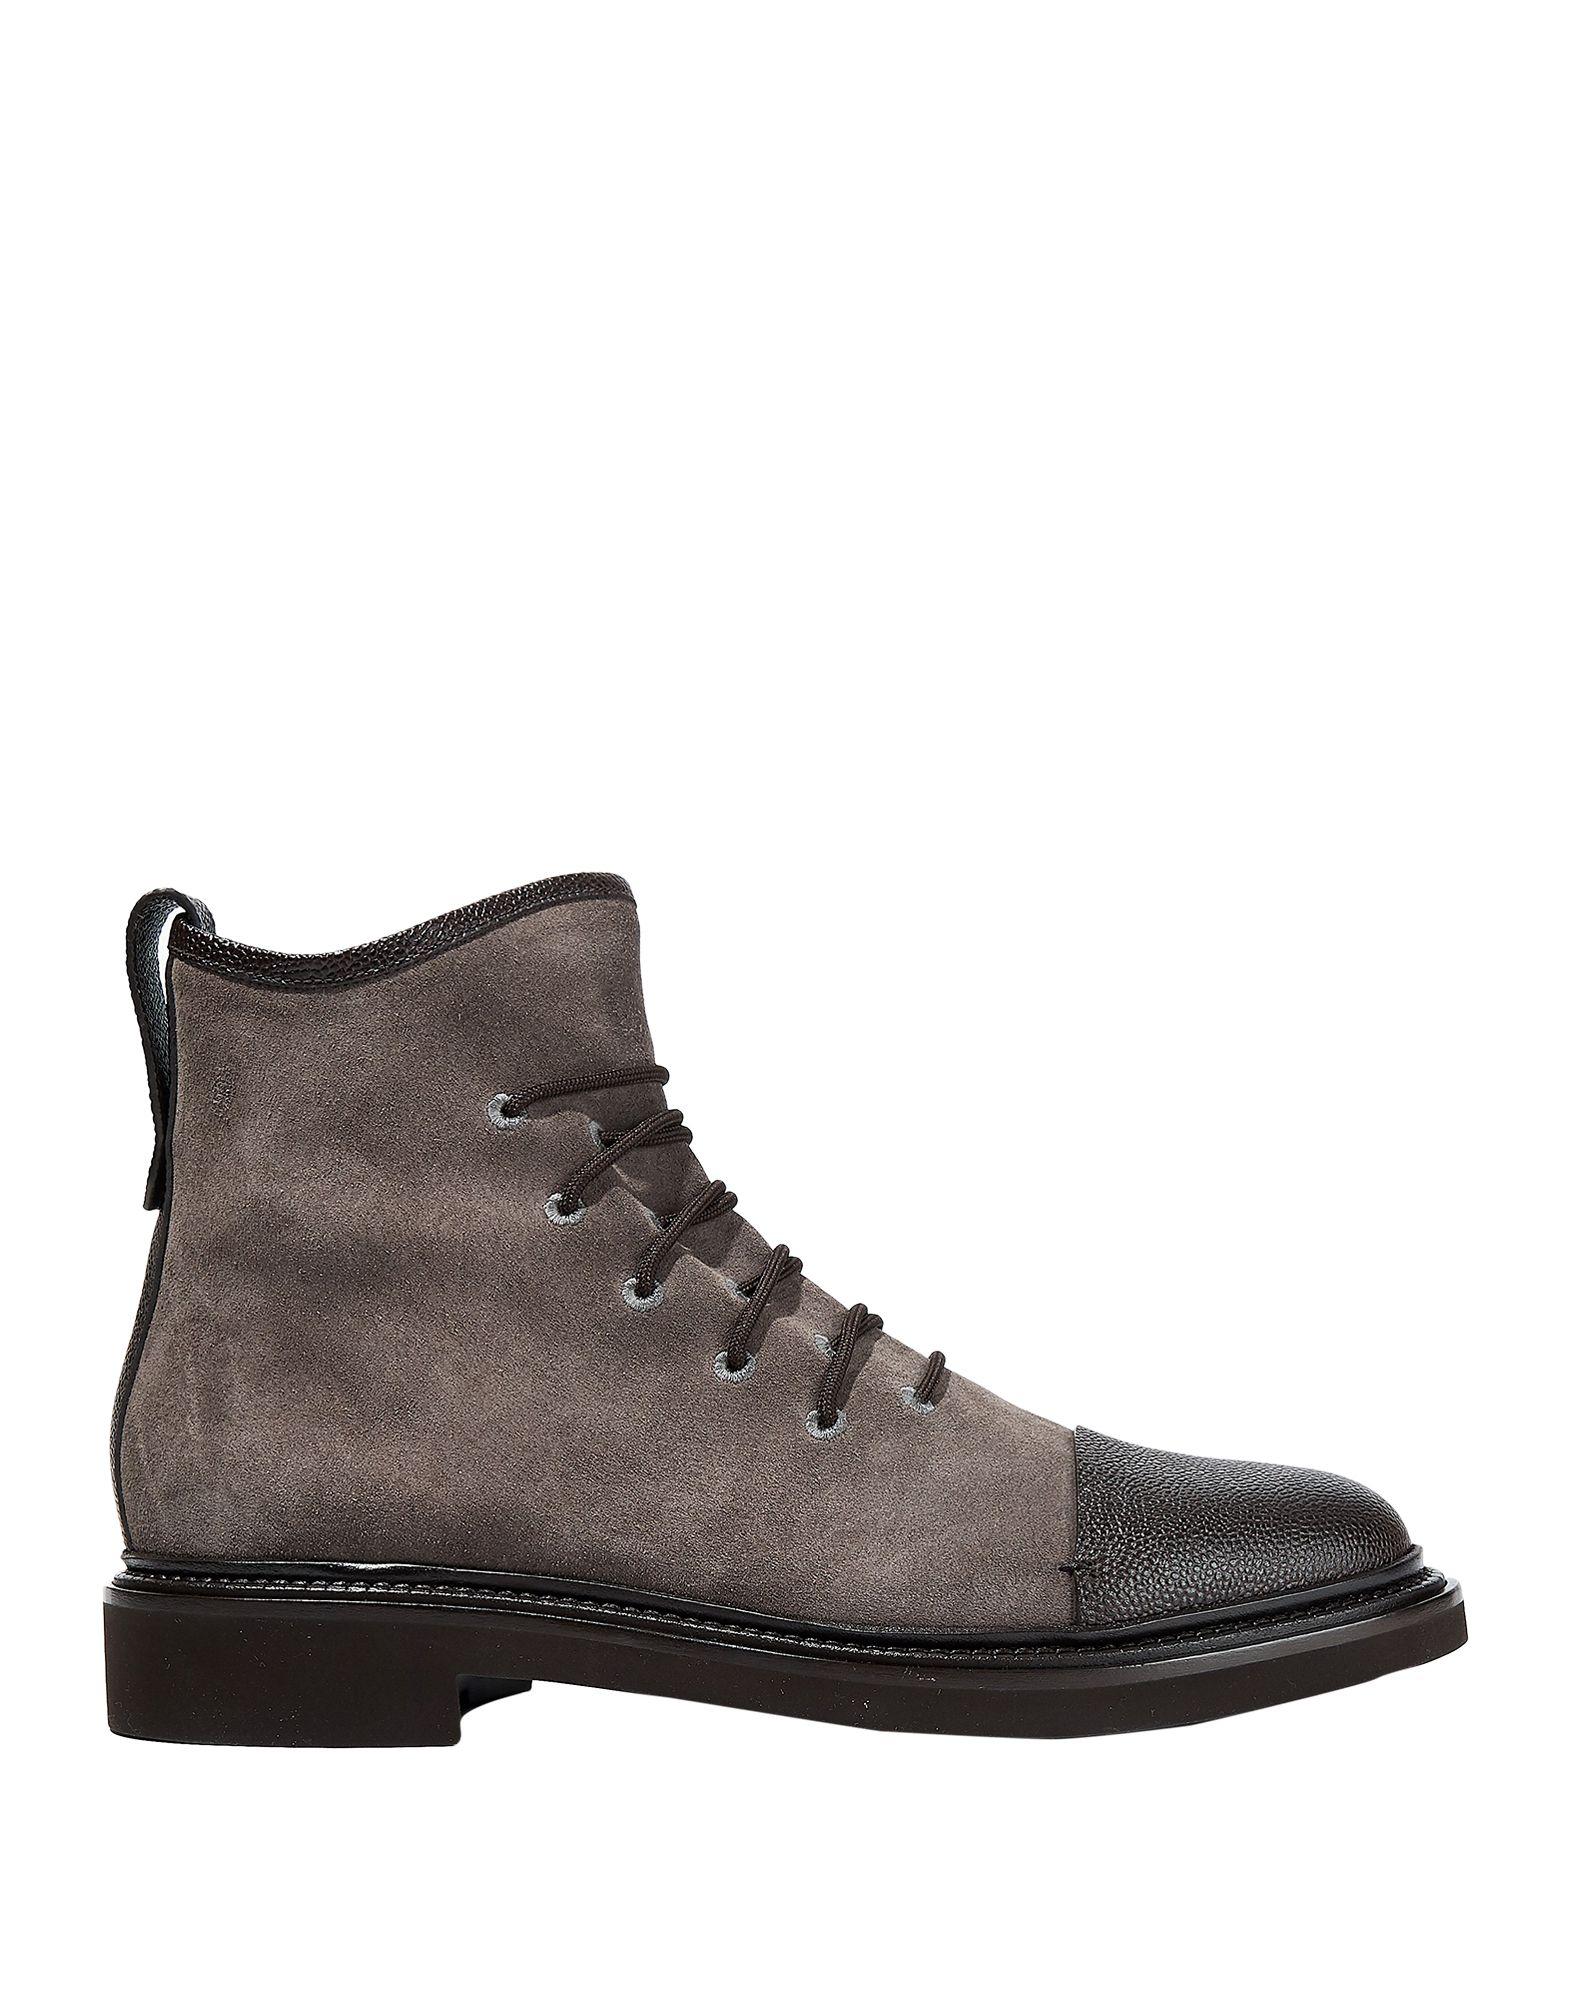 Giorgio Armani Leather Ankle Boots in Dark Brown (Brown) for Men - Lyst